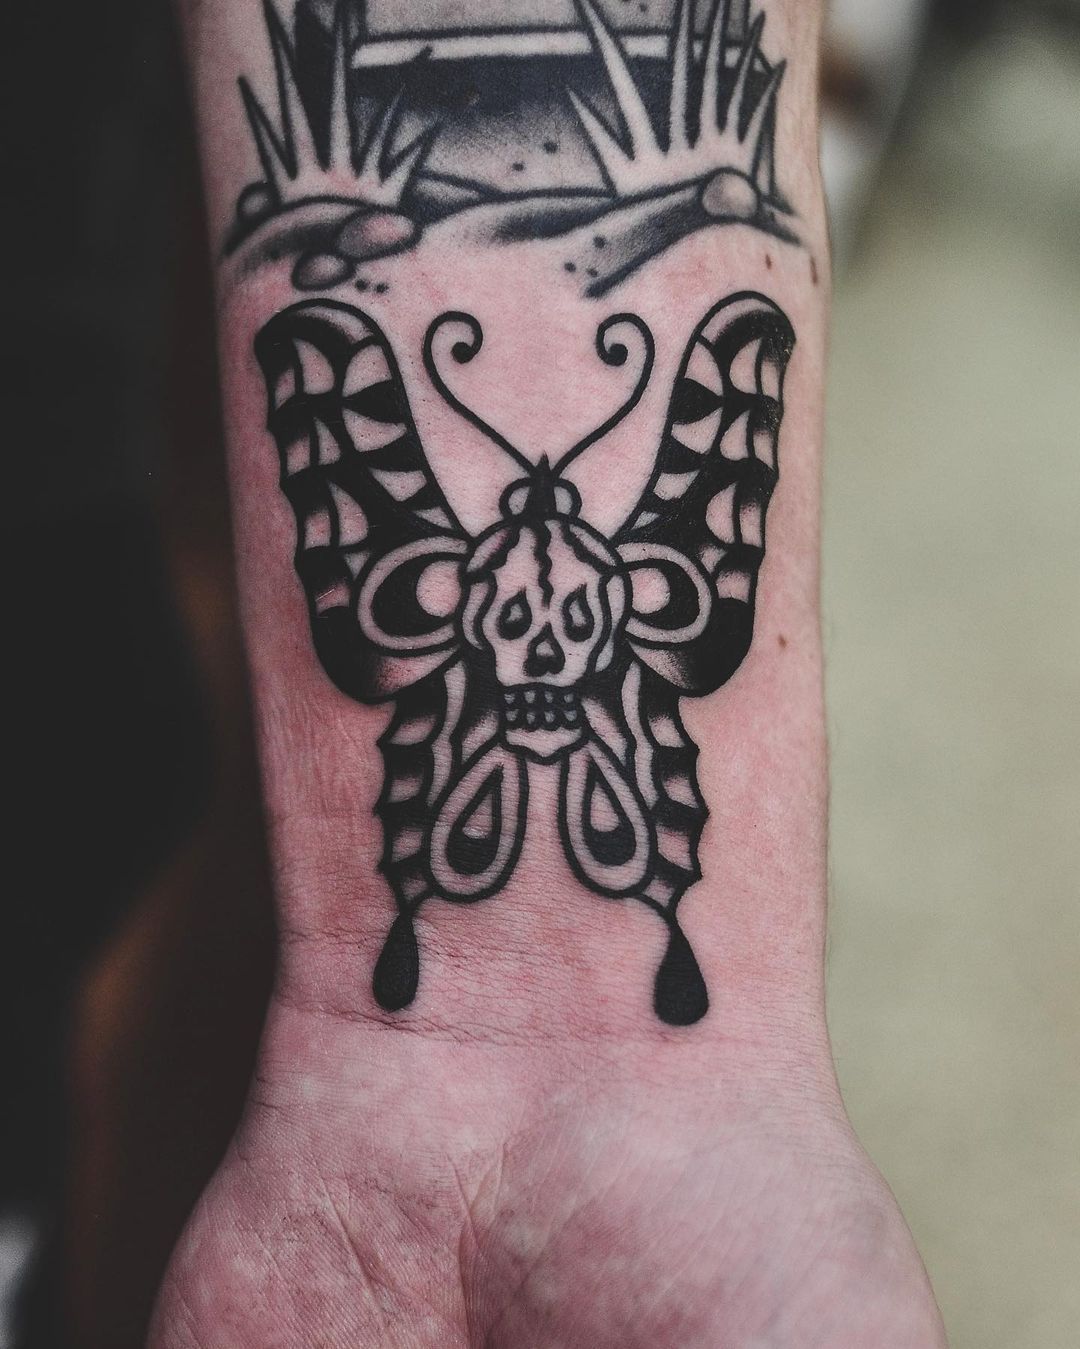 20 Creative Tattoos That Come Alive With Your Body Movements